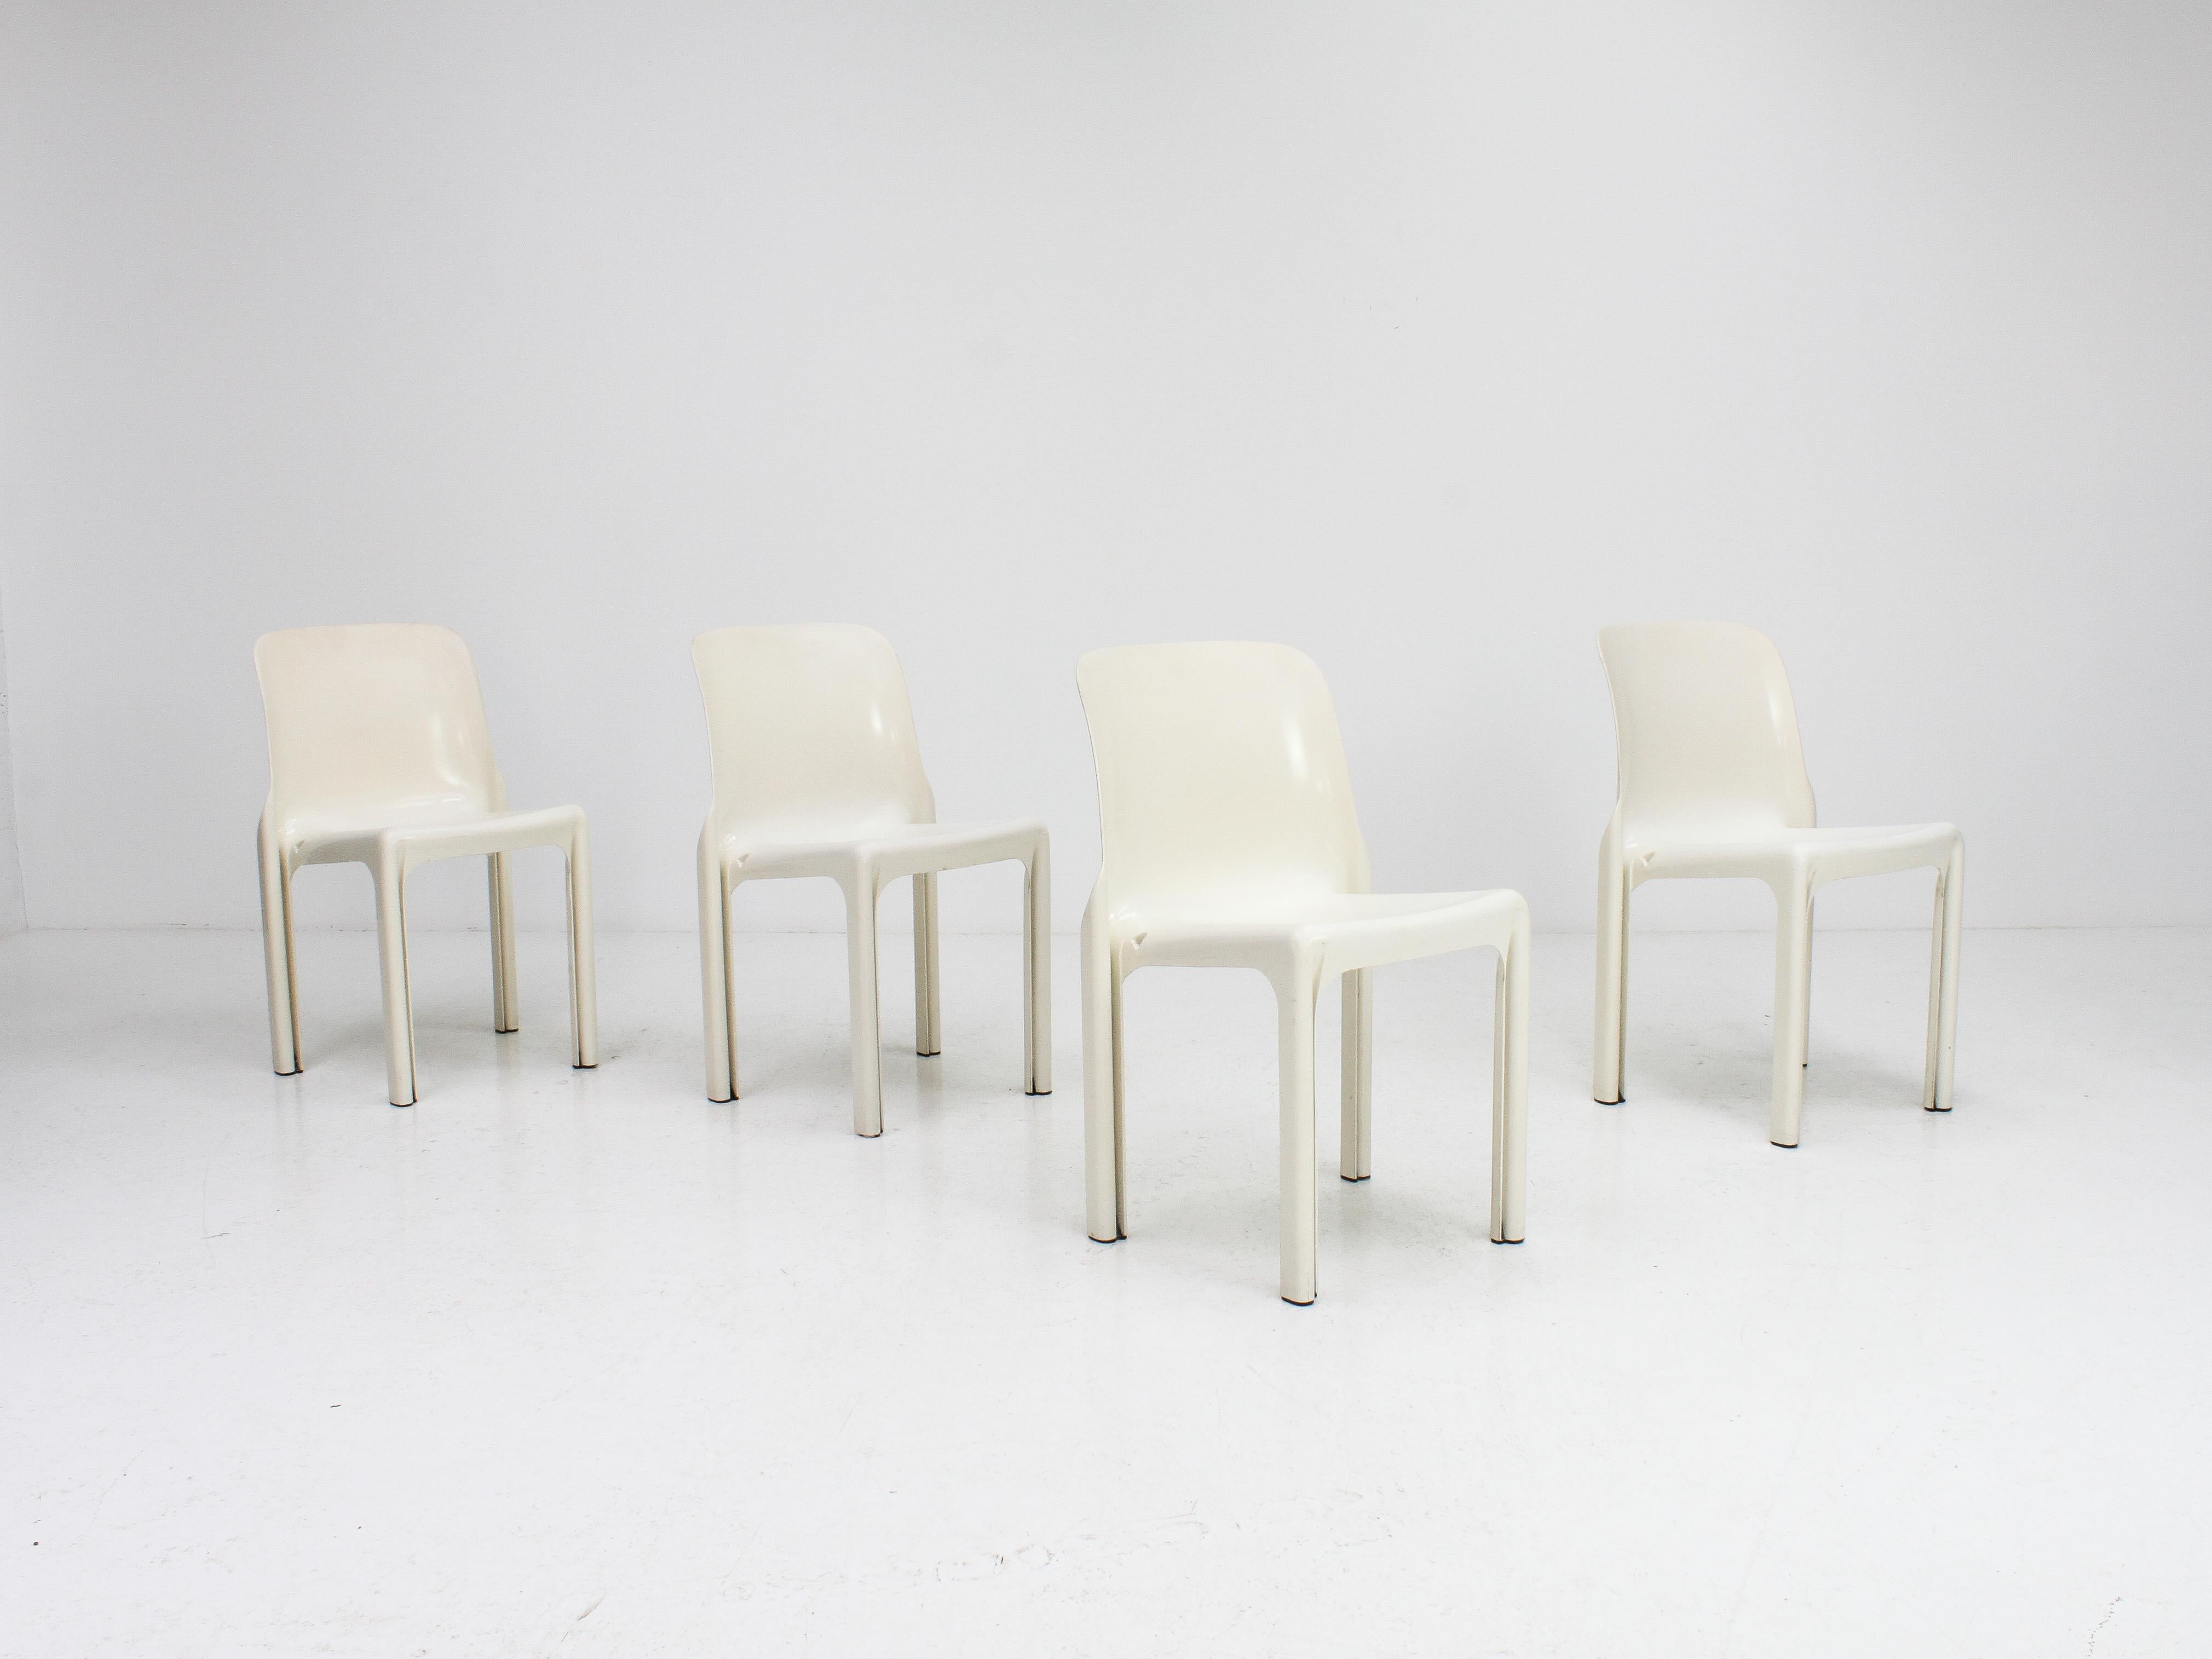 Italian 'Selene' Stacking Chairs in White by Vico Magistretti for Artemide, 1969